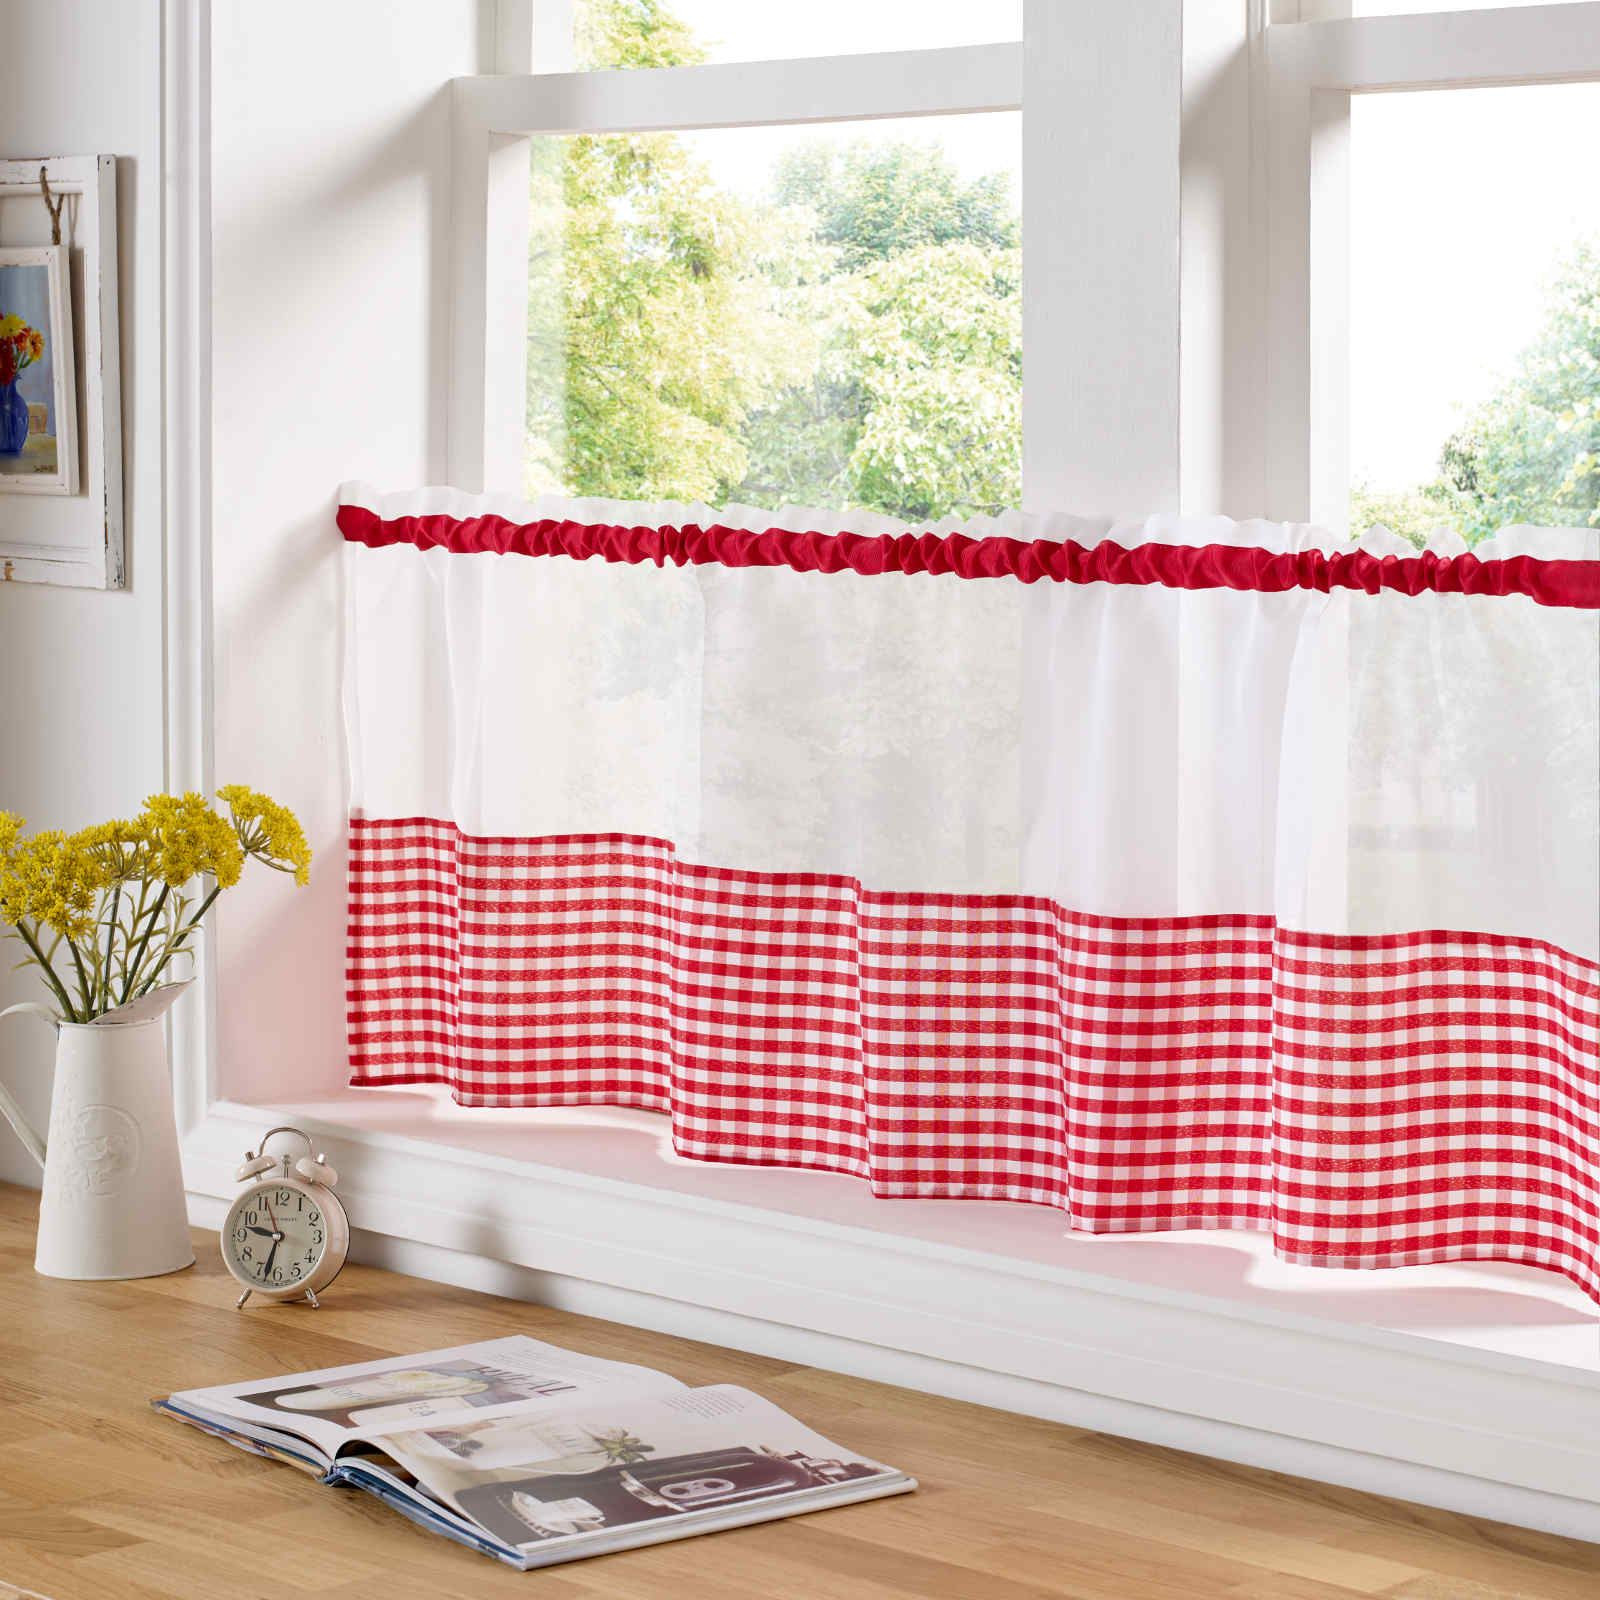 Gingham Kitchen Curtains
 COUNTRY STYLE KITCHEN GINGHAM CURTAIN PAIR WINDOW DRAPES